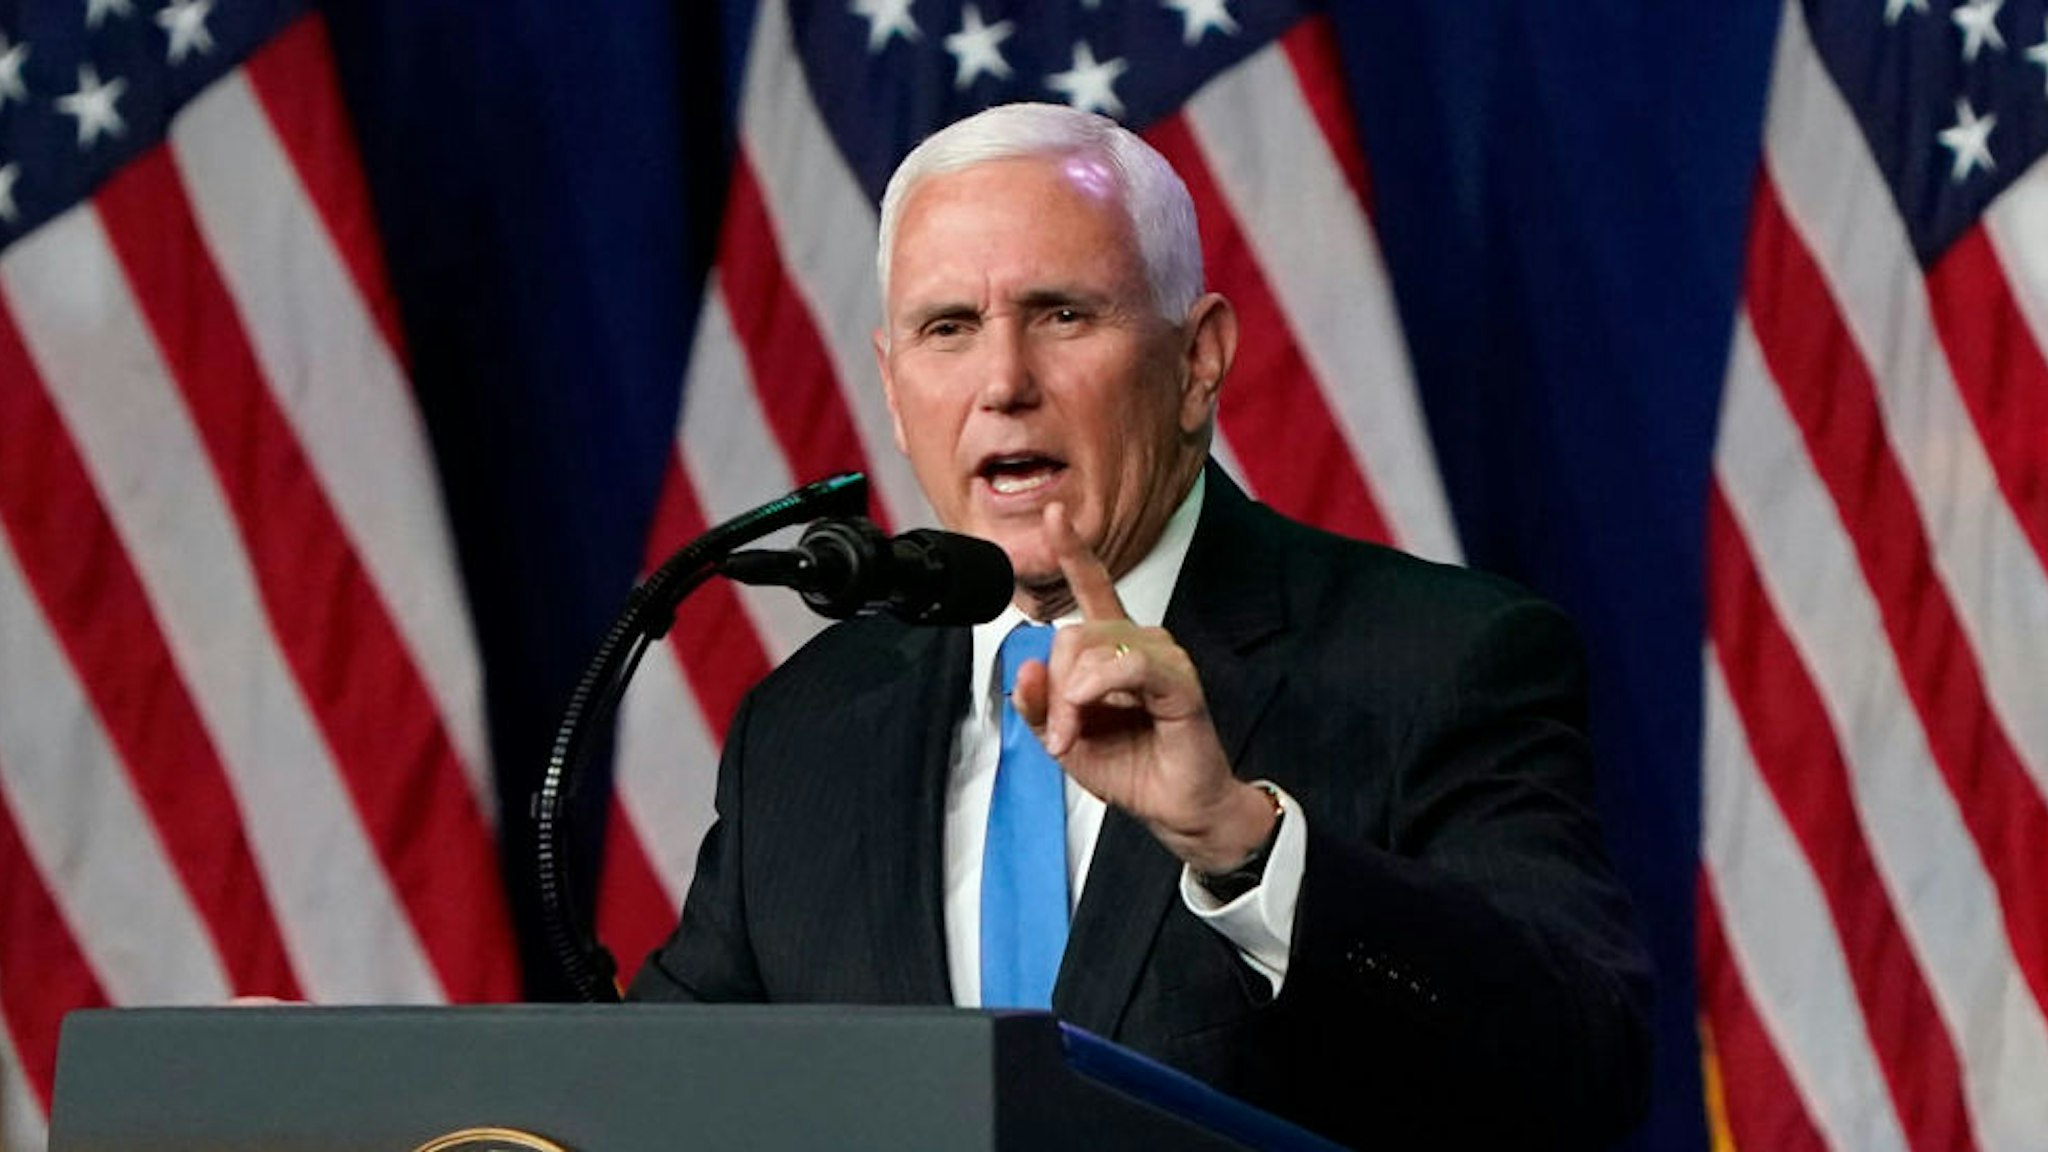 CHARLOTTE, NORTH CAROLINA - AUGUST 24: Vice President Mike Pence speaks on the first day of the Republican National Convention at the Charlotte Convention Center on August 24, 2020 in Charlotte, North Carolina. The four-day event is themed "Honoring the Great American Story."